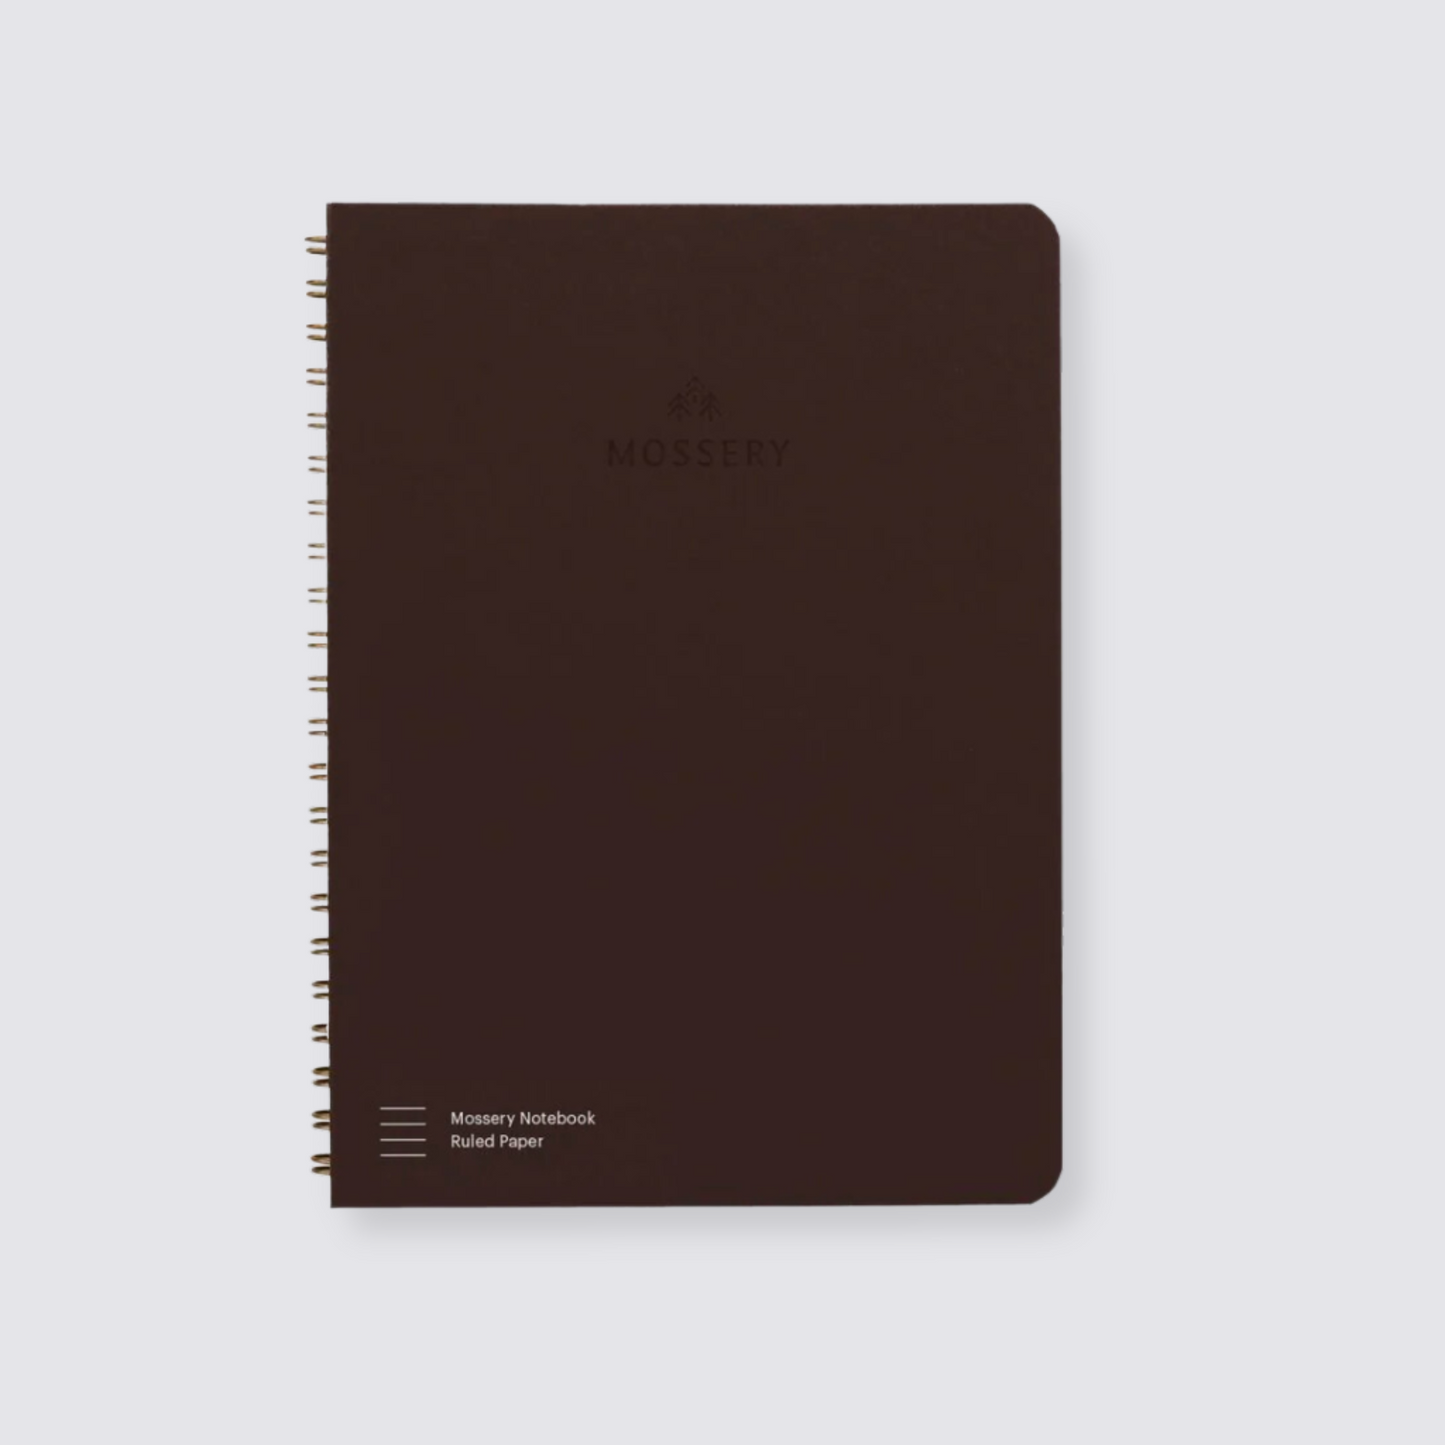 Refillable Notebook - Komorebi / Ruled Pages